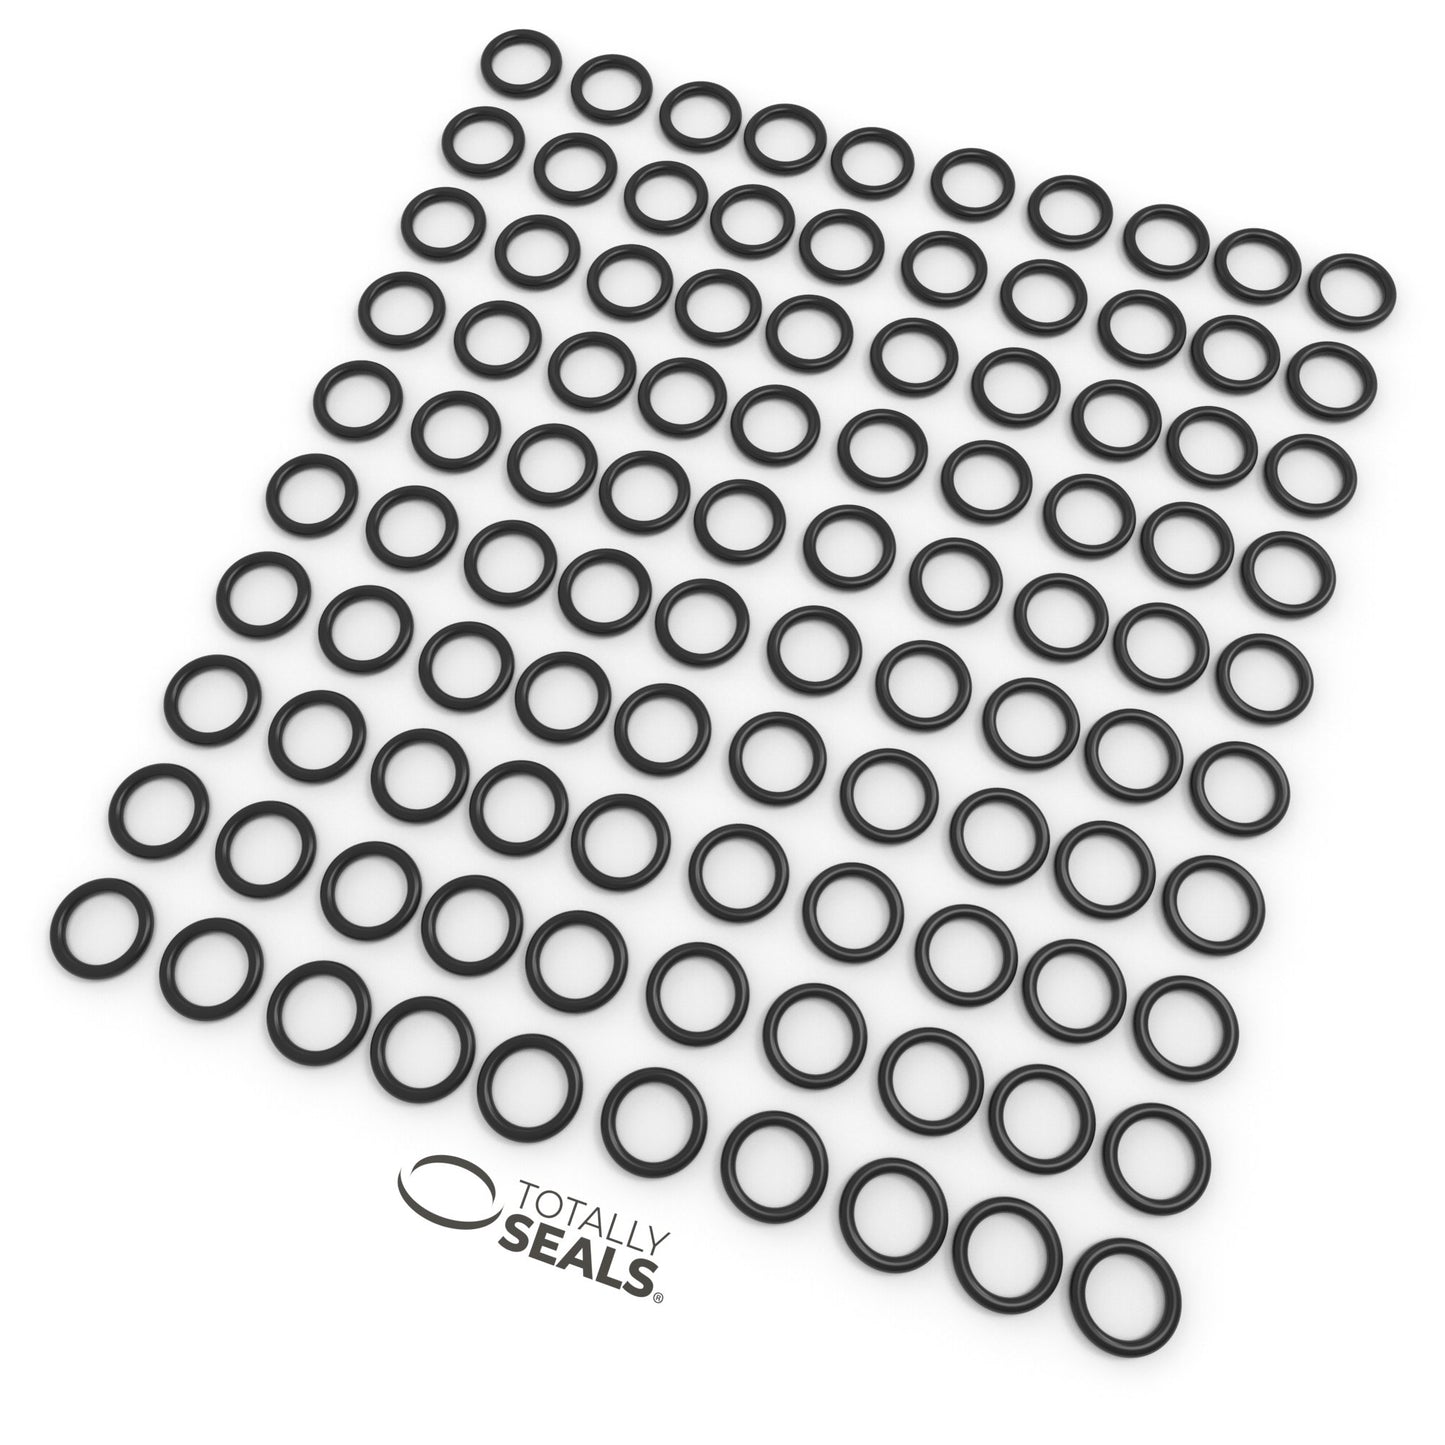 13mm x 4mm (21mm OD) Nitrile O-Rings - Totally Seals®